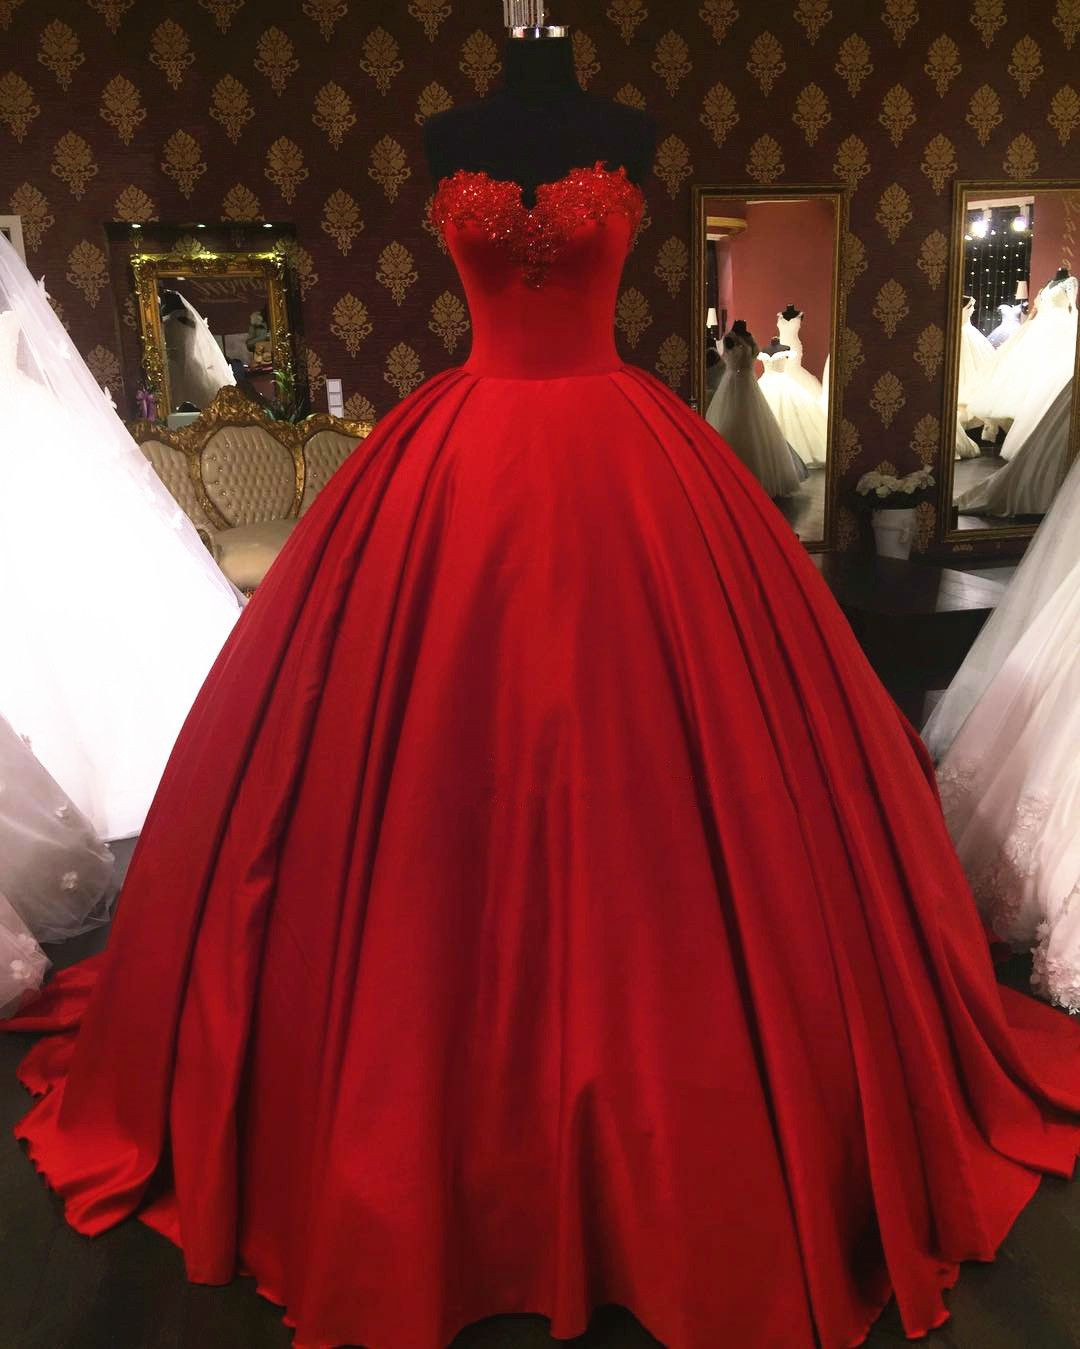 Red Ball Gown Wedding Dresses
 Pin by Nancy on Fashion Dresses